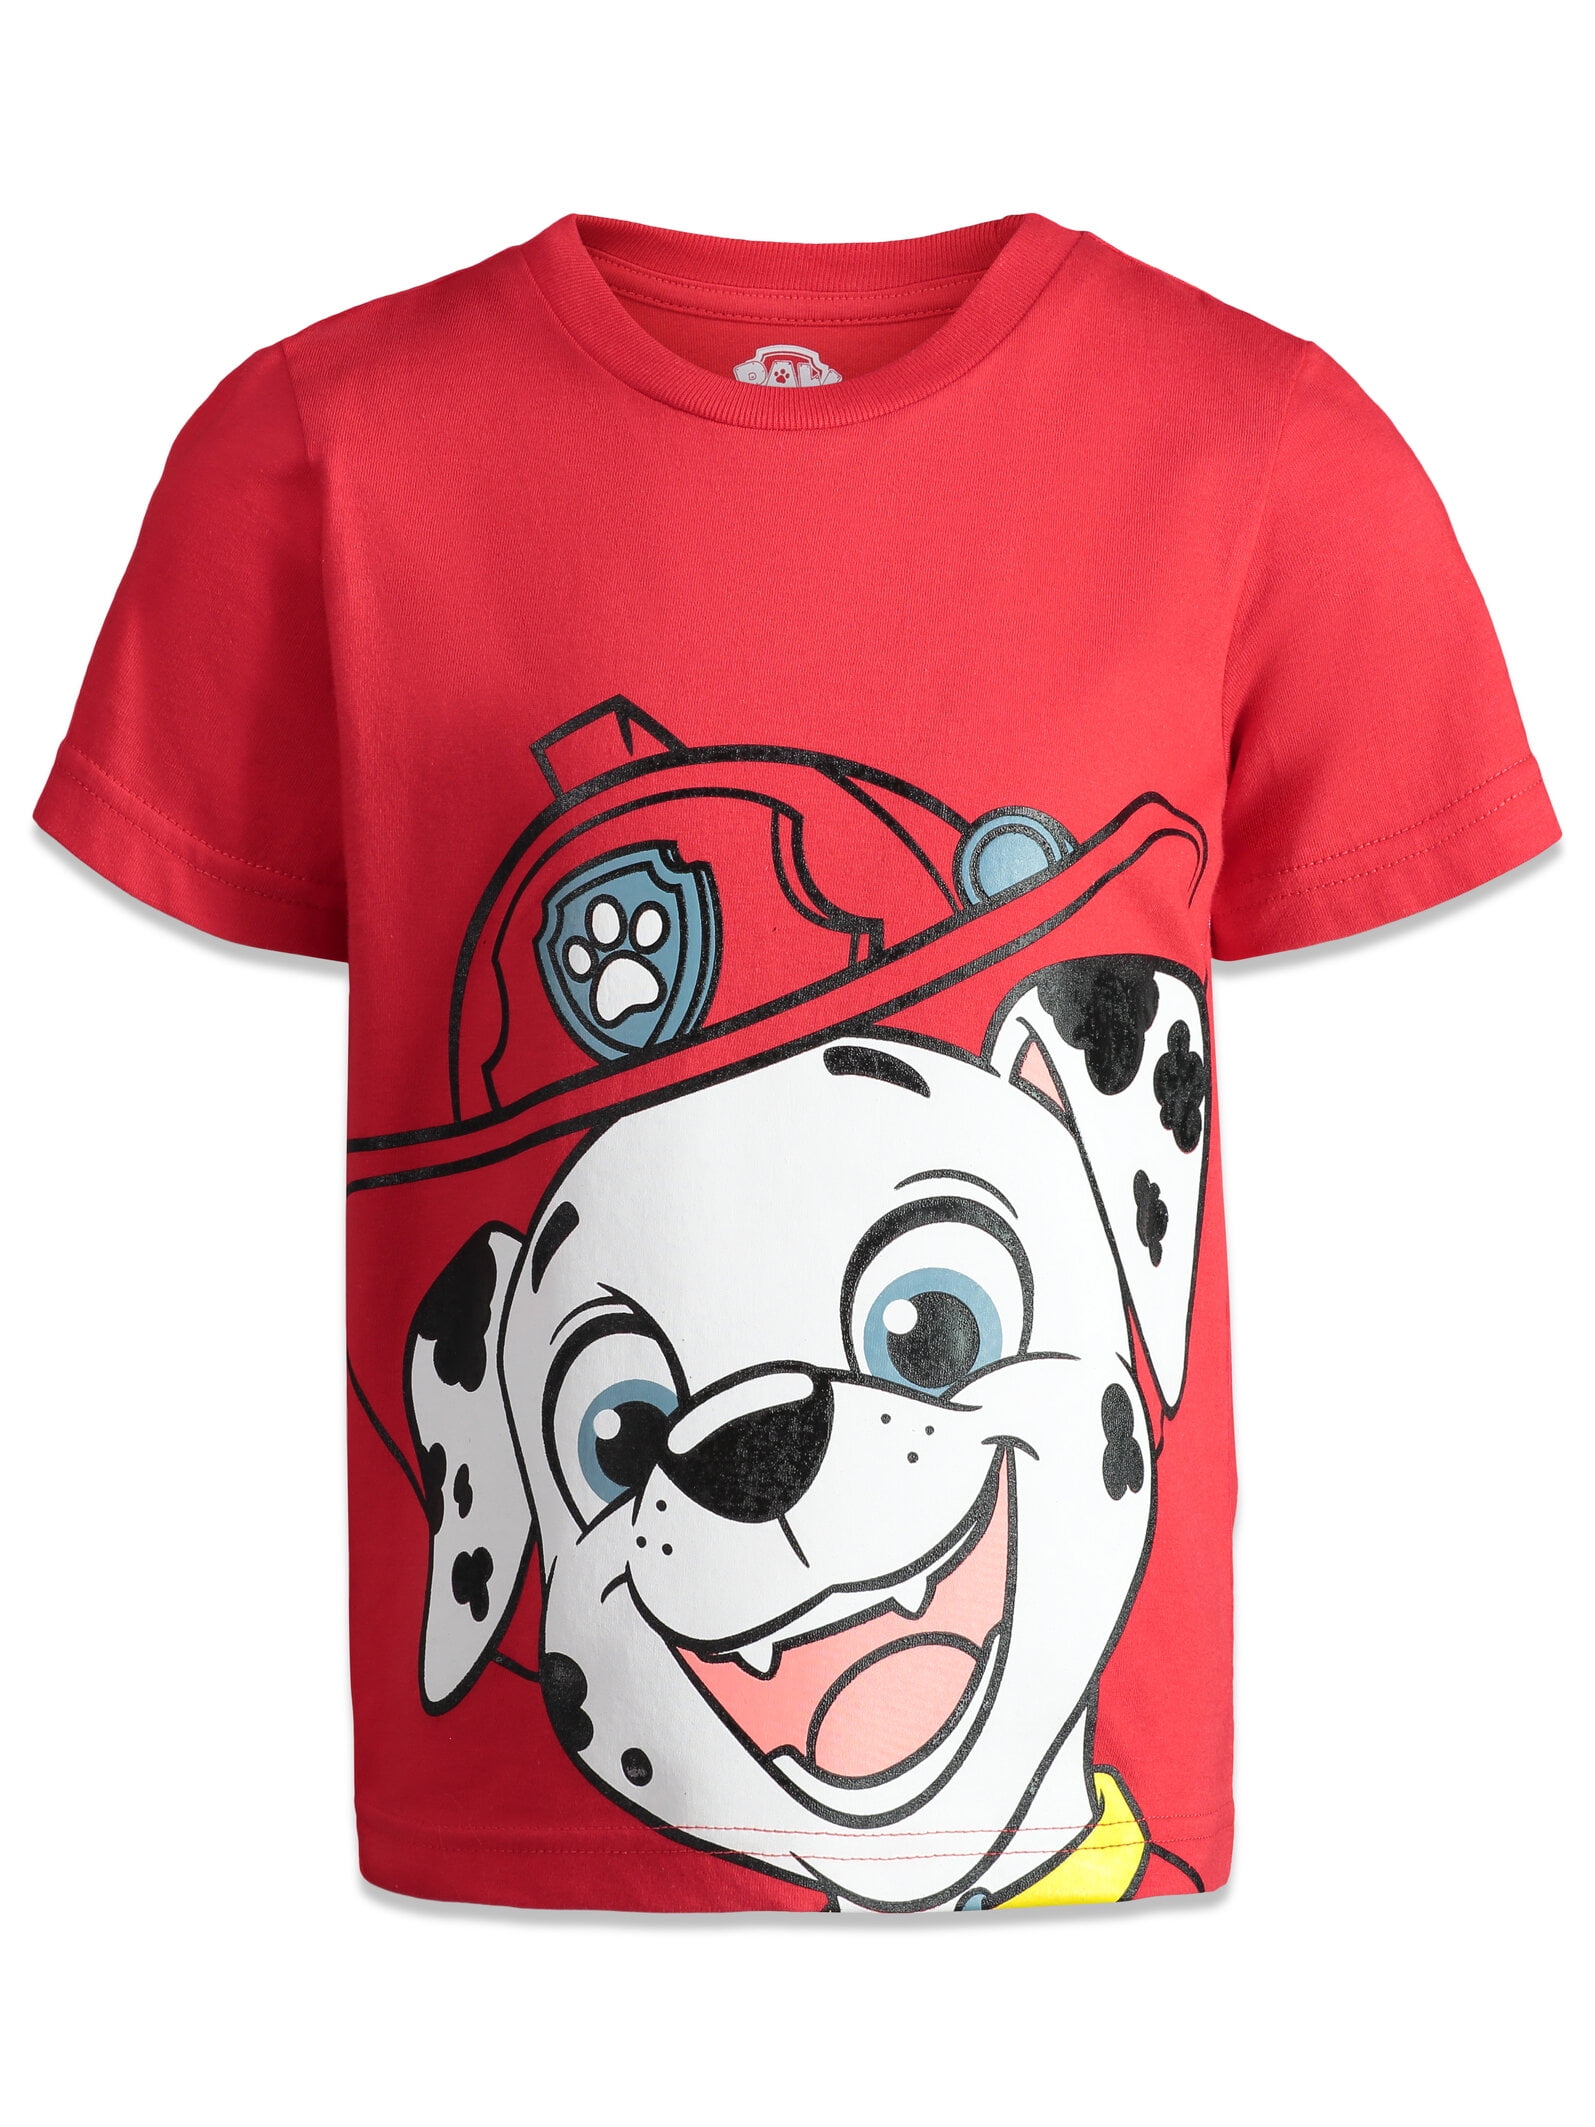 Paw Patrol Chase Graphic T-Shirt Rocky Rubble 4 Marshall Pack Toddler Boys 3T 